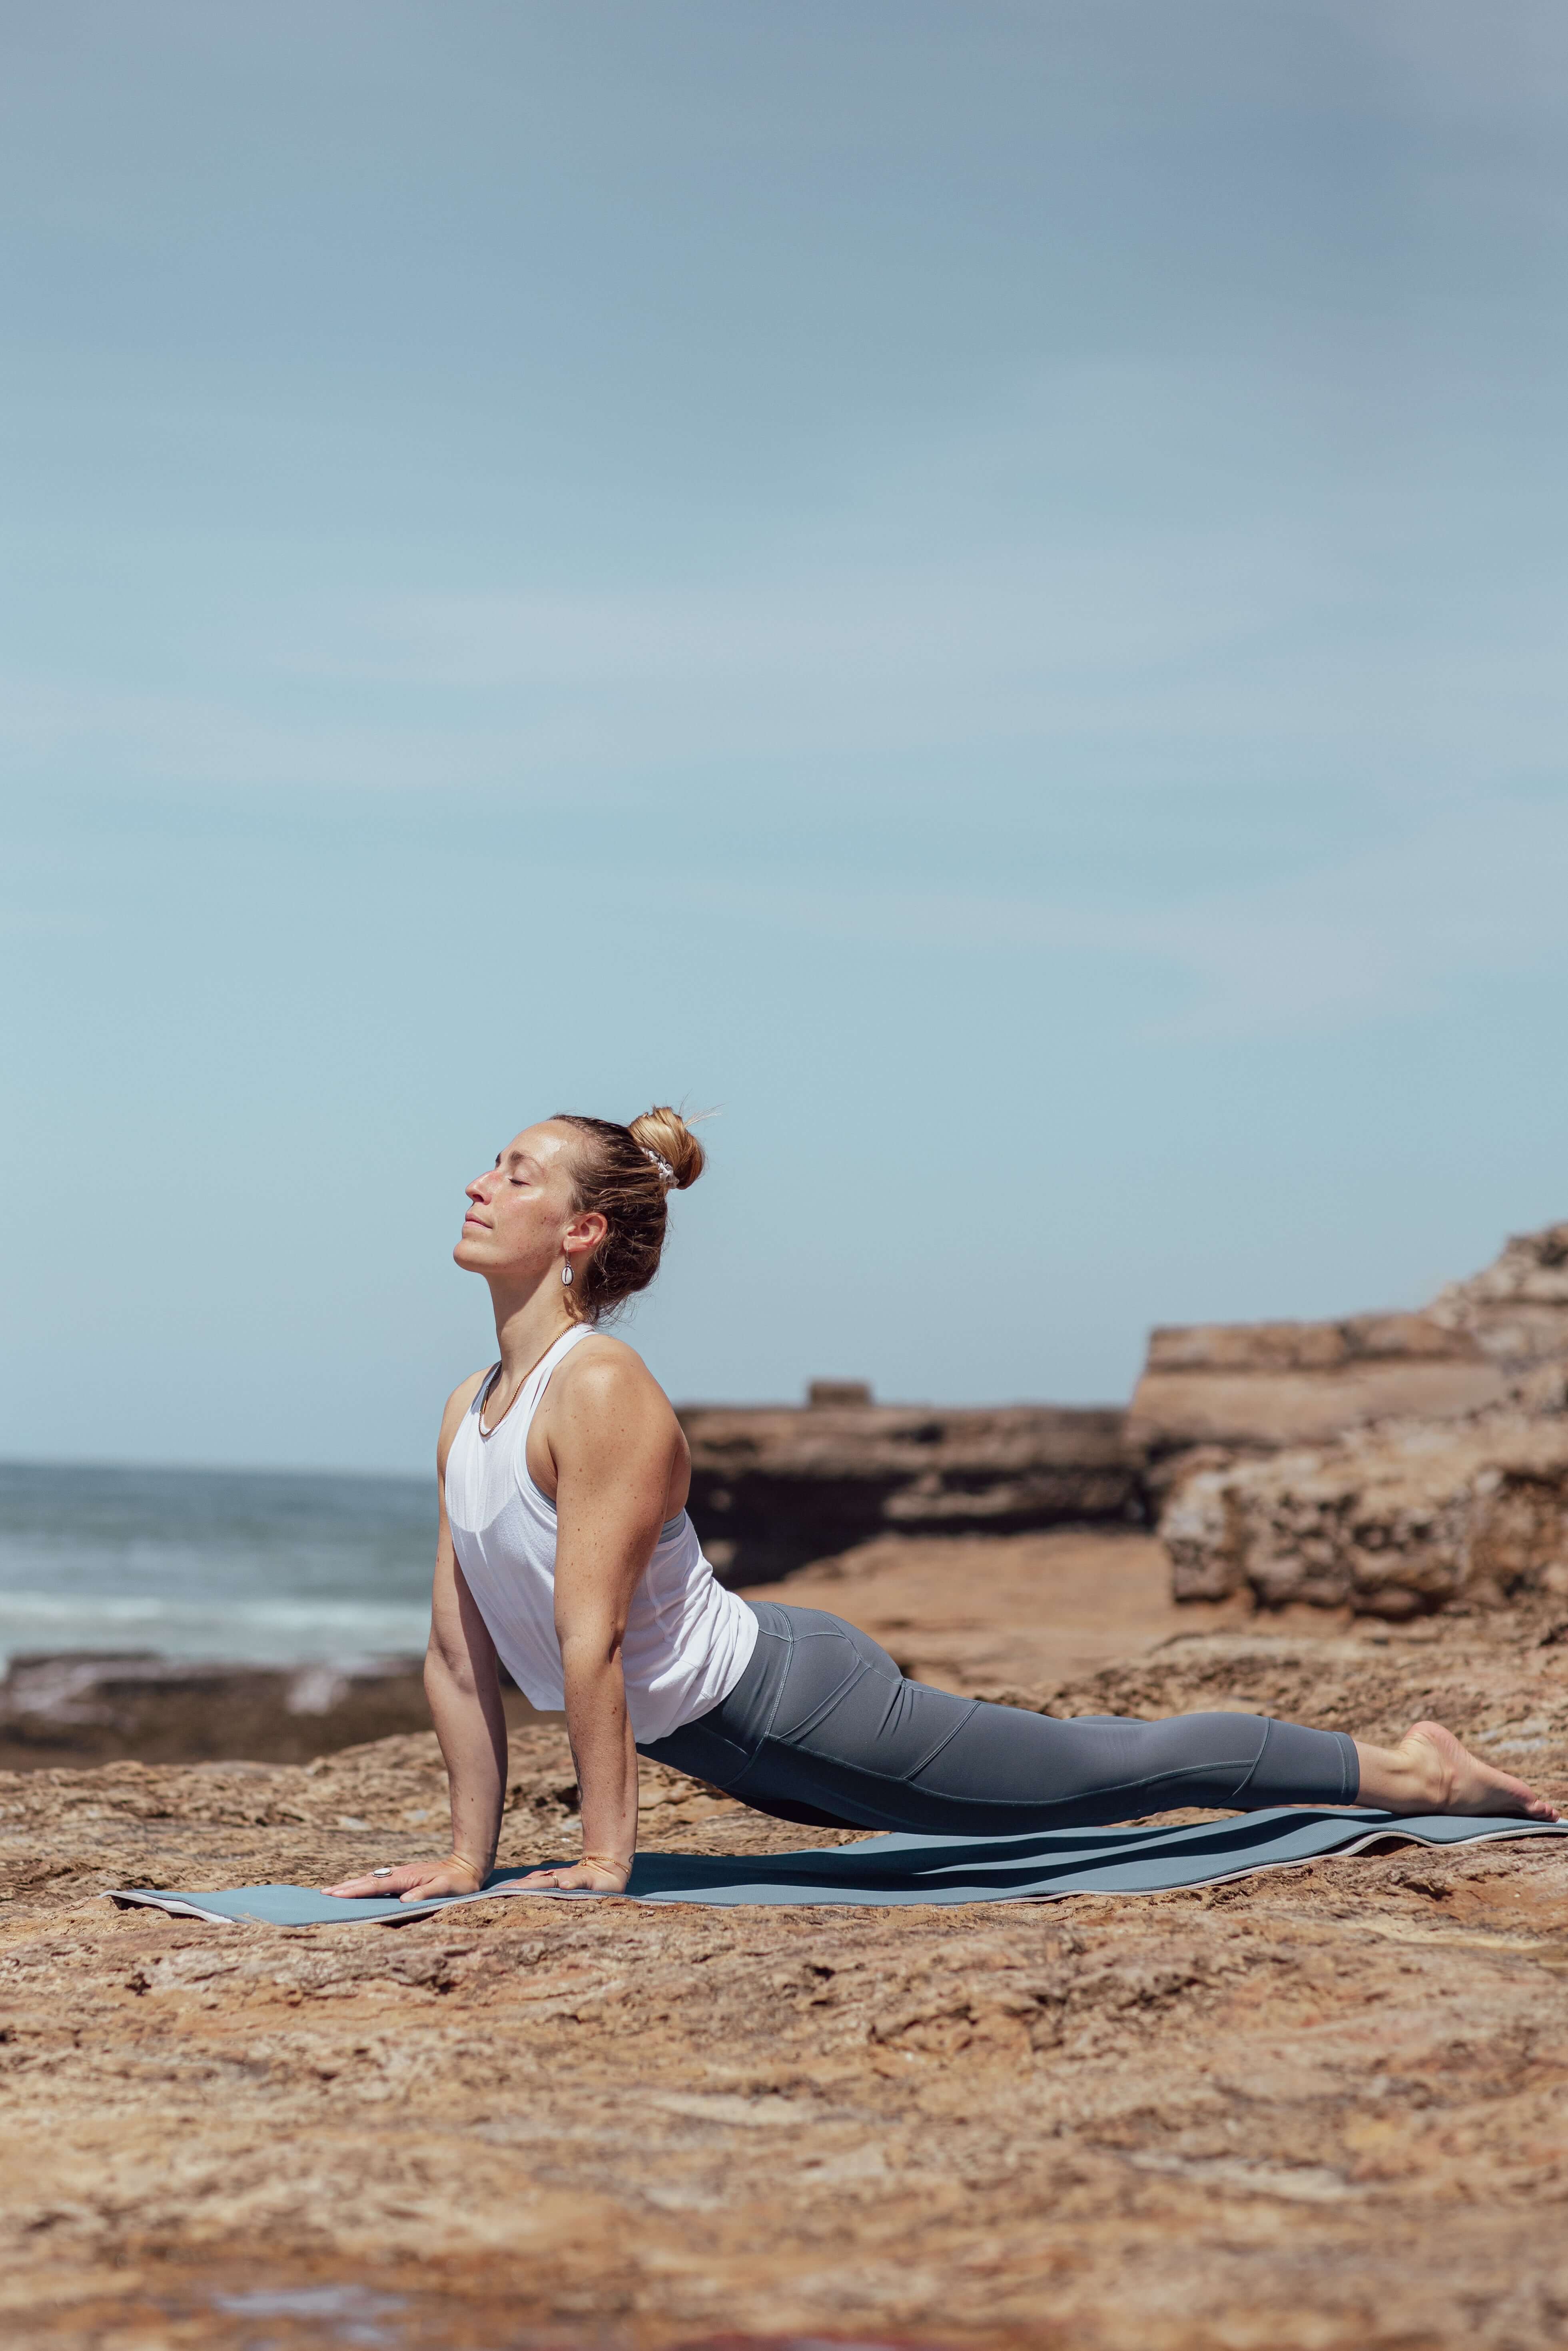 How to use yoga to improve your surfing skills - Lapoint Surf camps